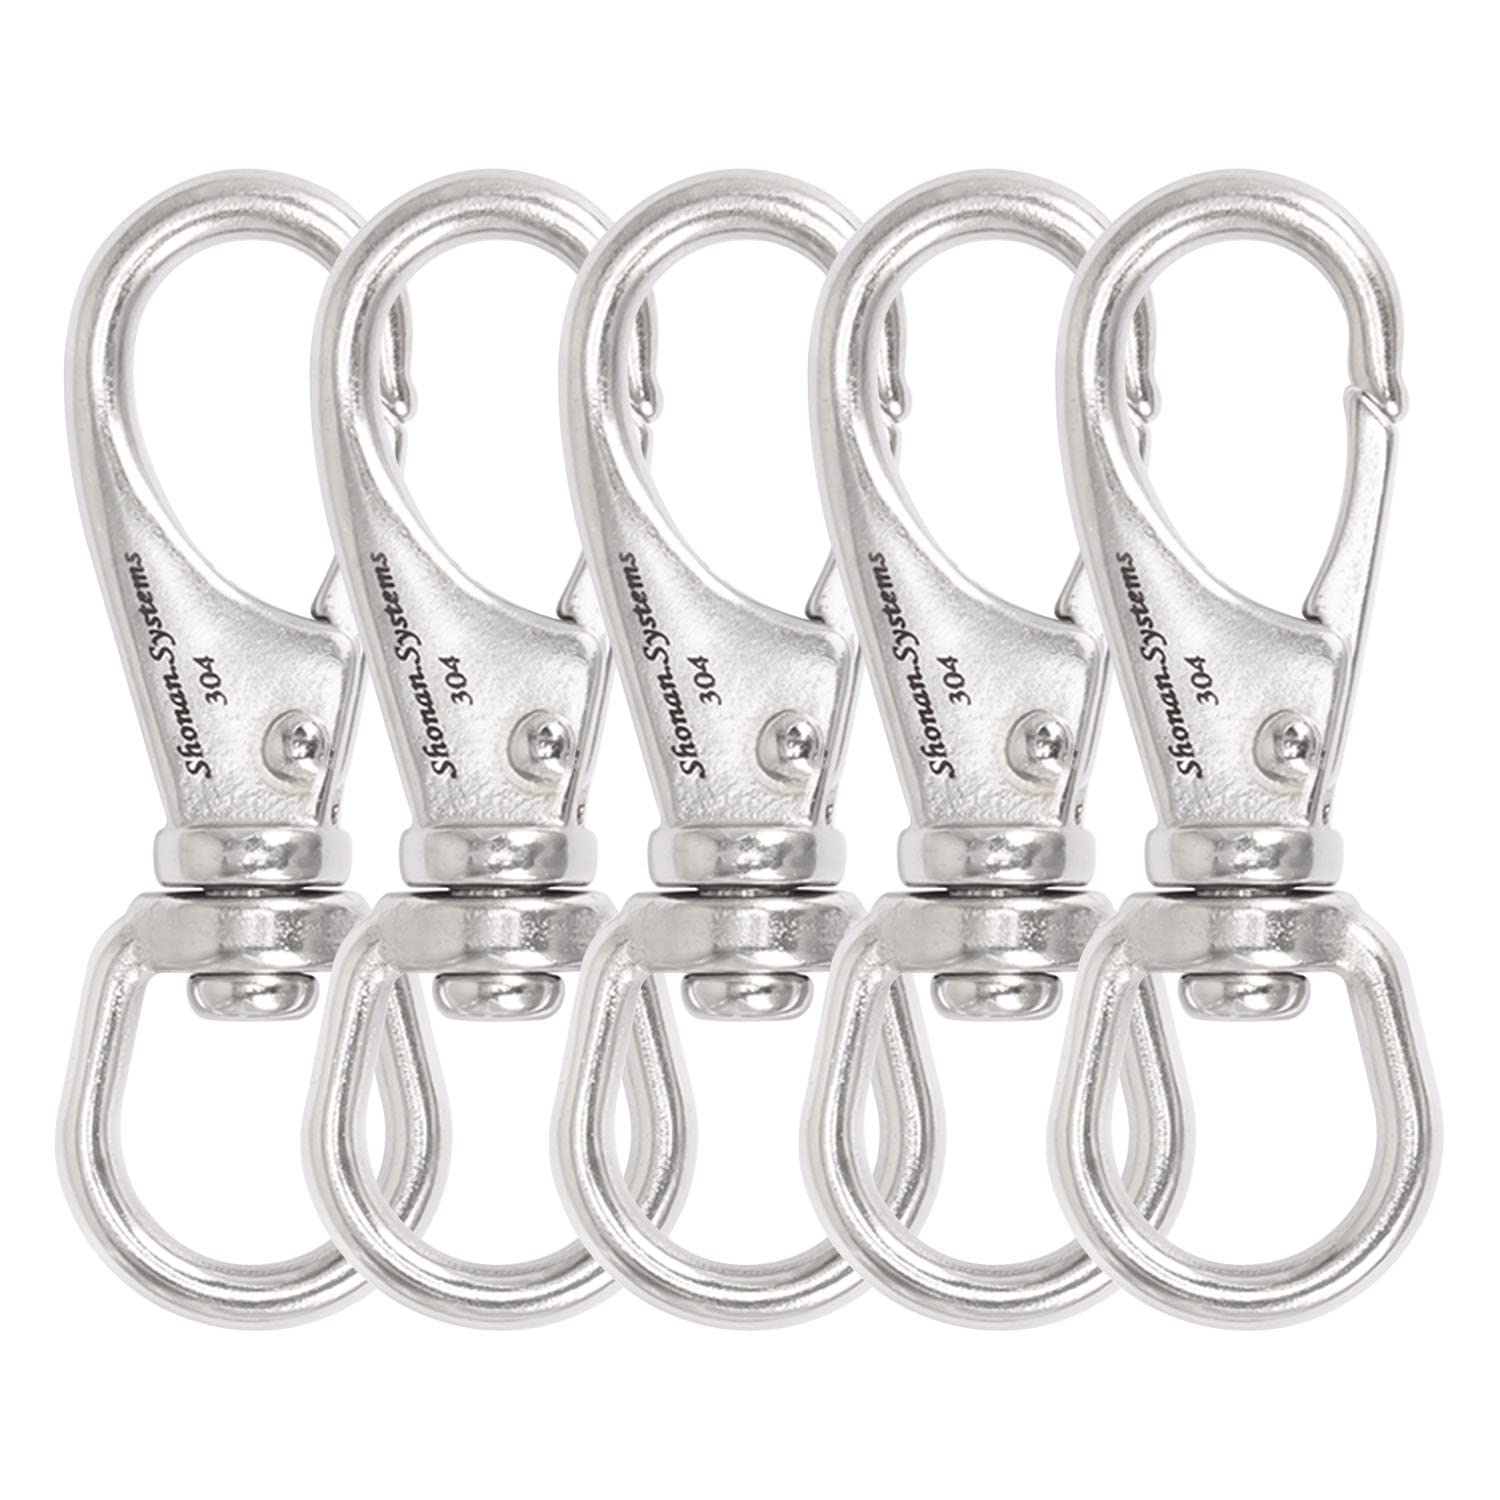 SHONAN 2.7 Inch Swivel Snap Hooks, 5 Pack Small Stainless Steel Spring  Clips, Flag Pole Clips, Scuba Diving Clips Spring Hooks for Dog leashes,  Keychains, Bird Feeders, Pet Chains and More